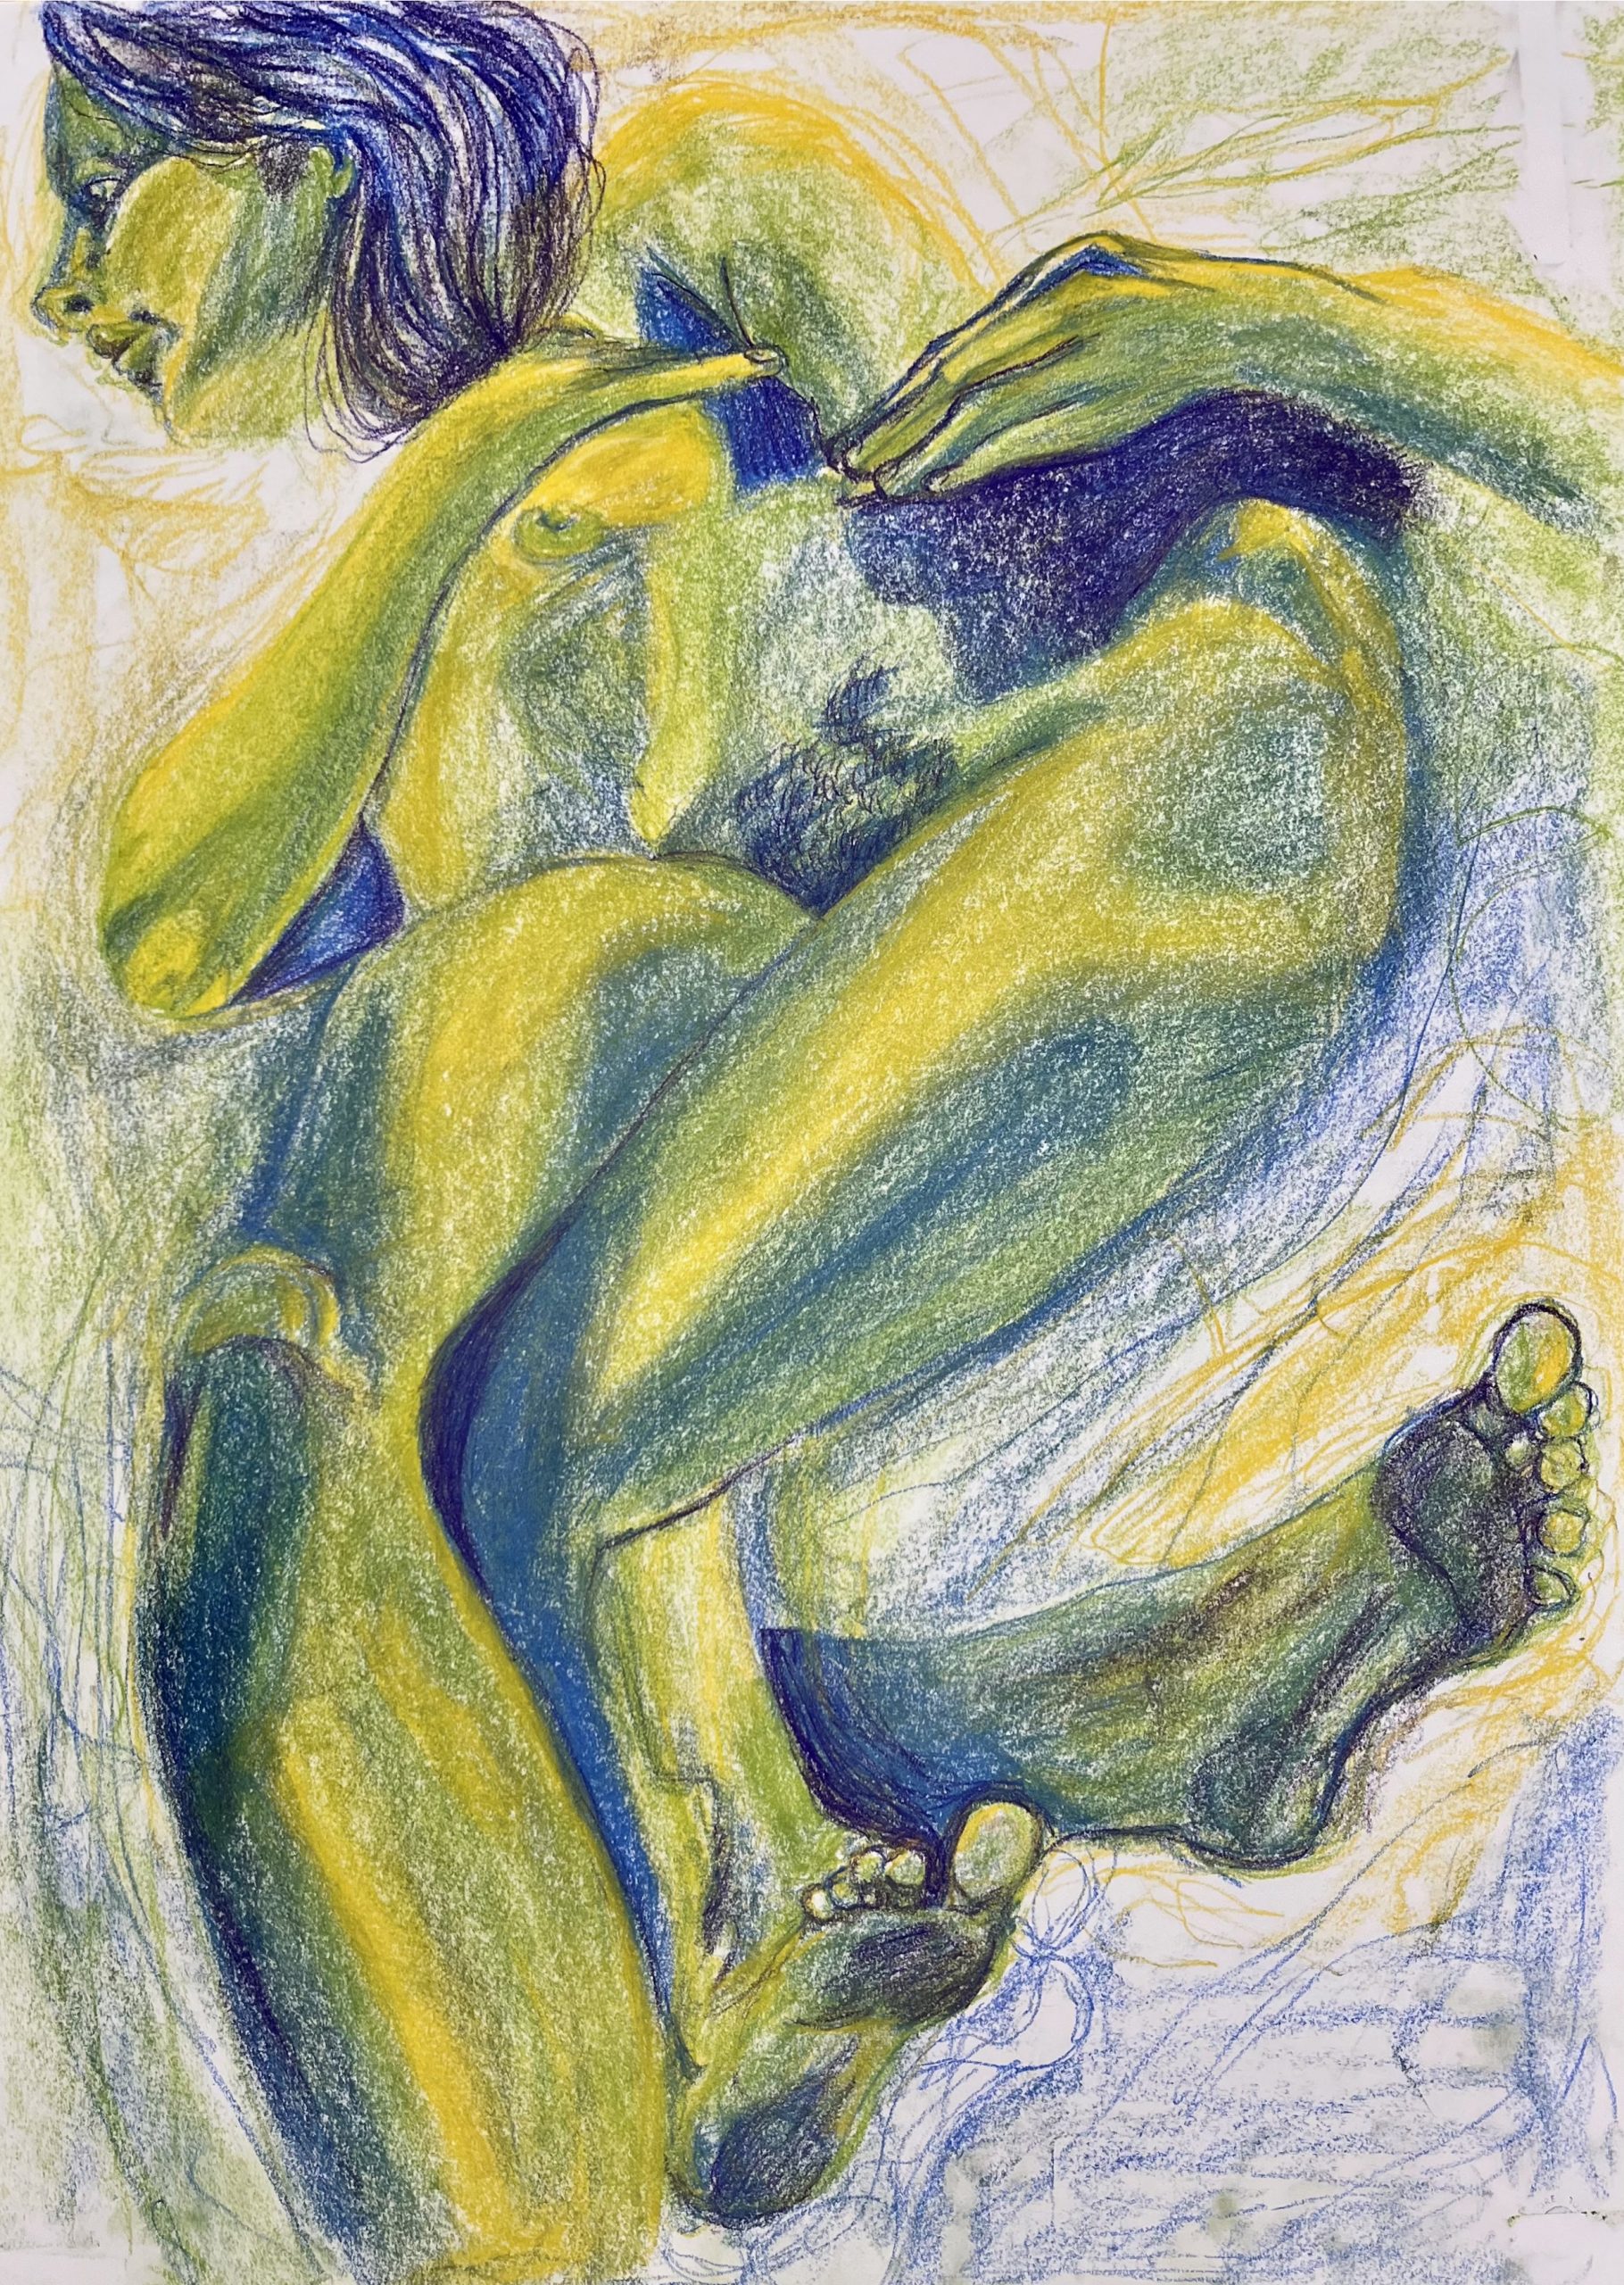 A figure study of a nude person rendered in green, yellow, and blue crayon. The figure's feet are towards the bottom of the page and appear closest to the viewer, with the figure appearing to be reclined backwards away from the viewer and towards the upper left corner. The shading is realistic, giving the figure a distinct volume, but the arrangement of the limbs is contorted. Combined with the vibrant color choices, the contorted limbs give the overall image a surreal quality.